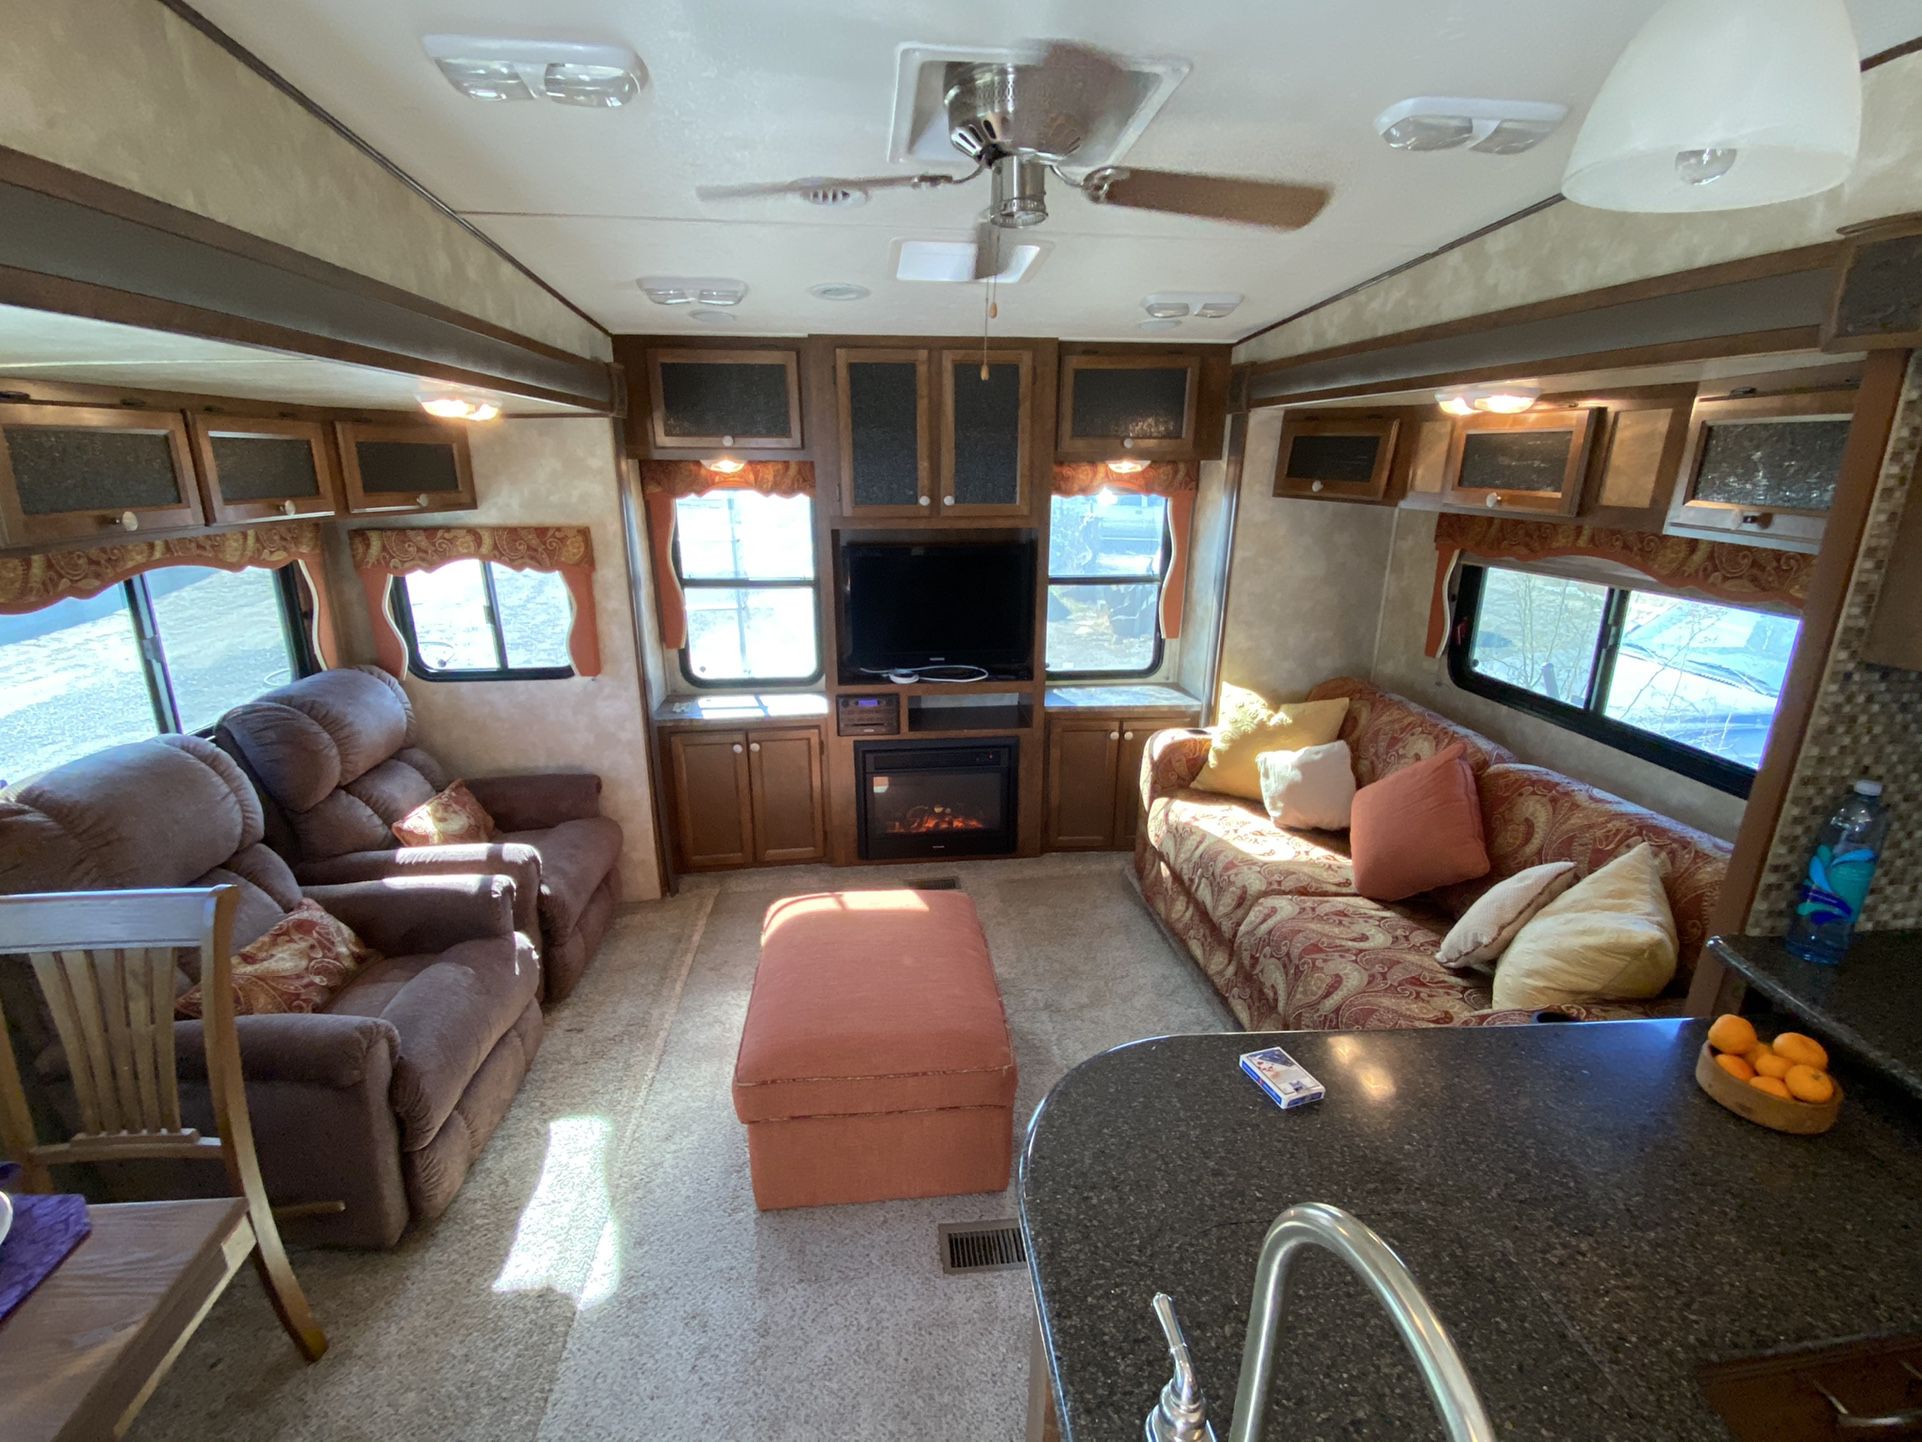 2013 Chaparral Coachmen 5th Wheel , 3 Slides, Fire Place, Big Windows, Beautiful Cabinetry All Around, AC